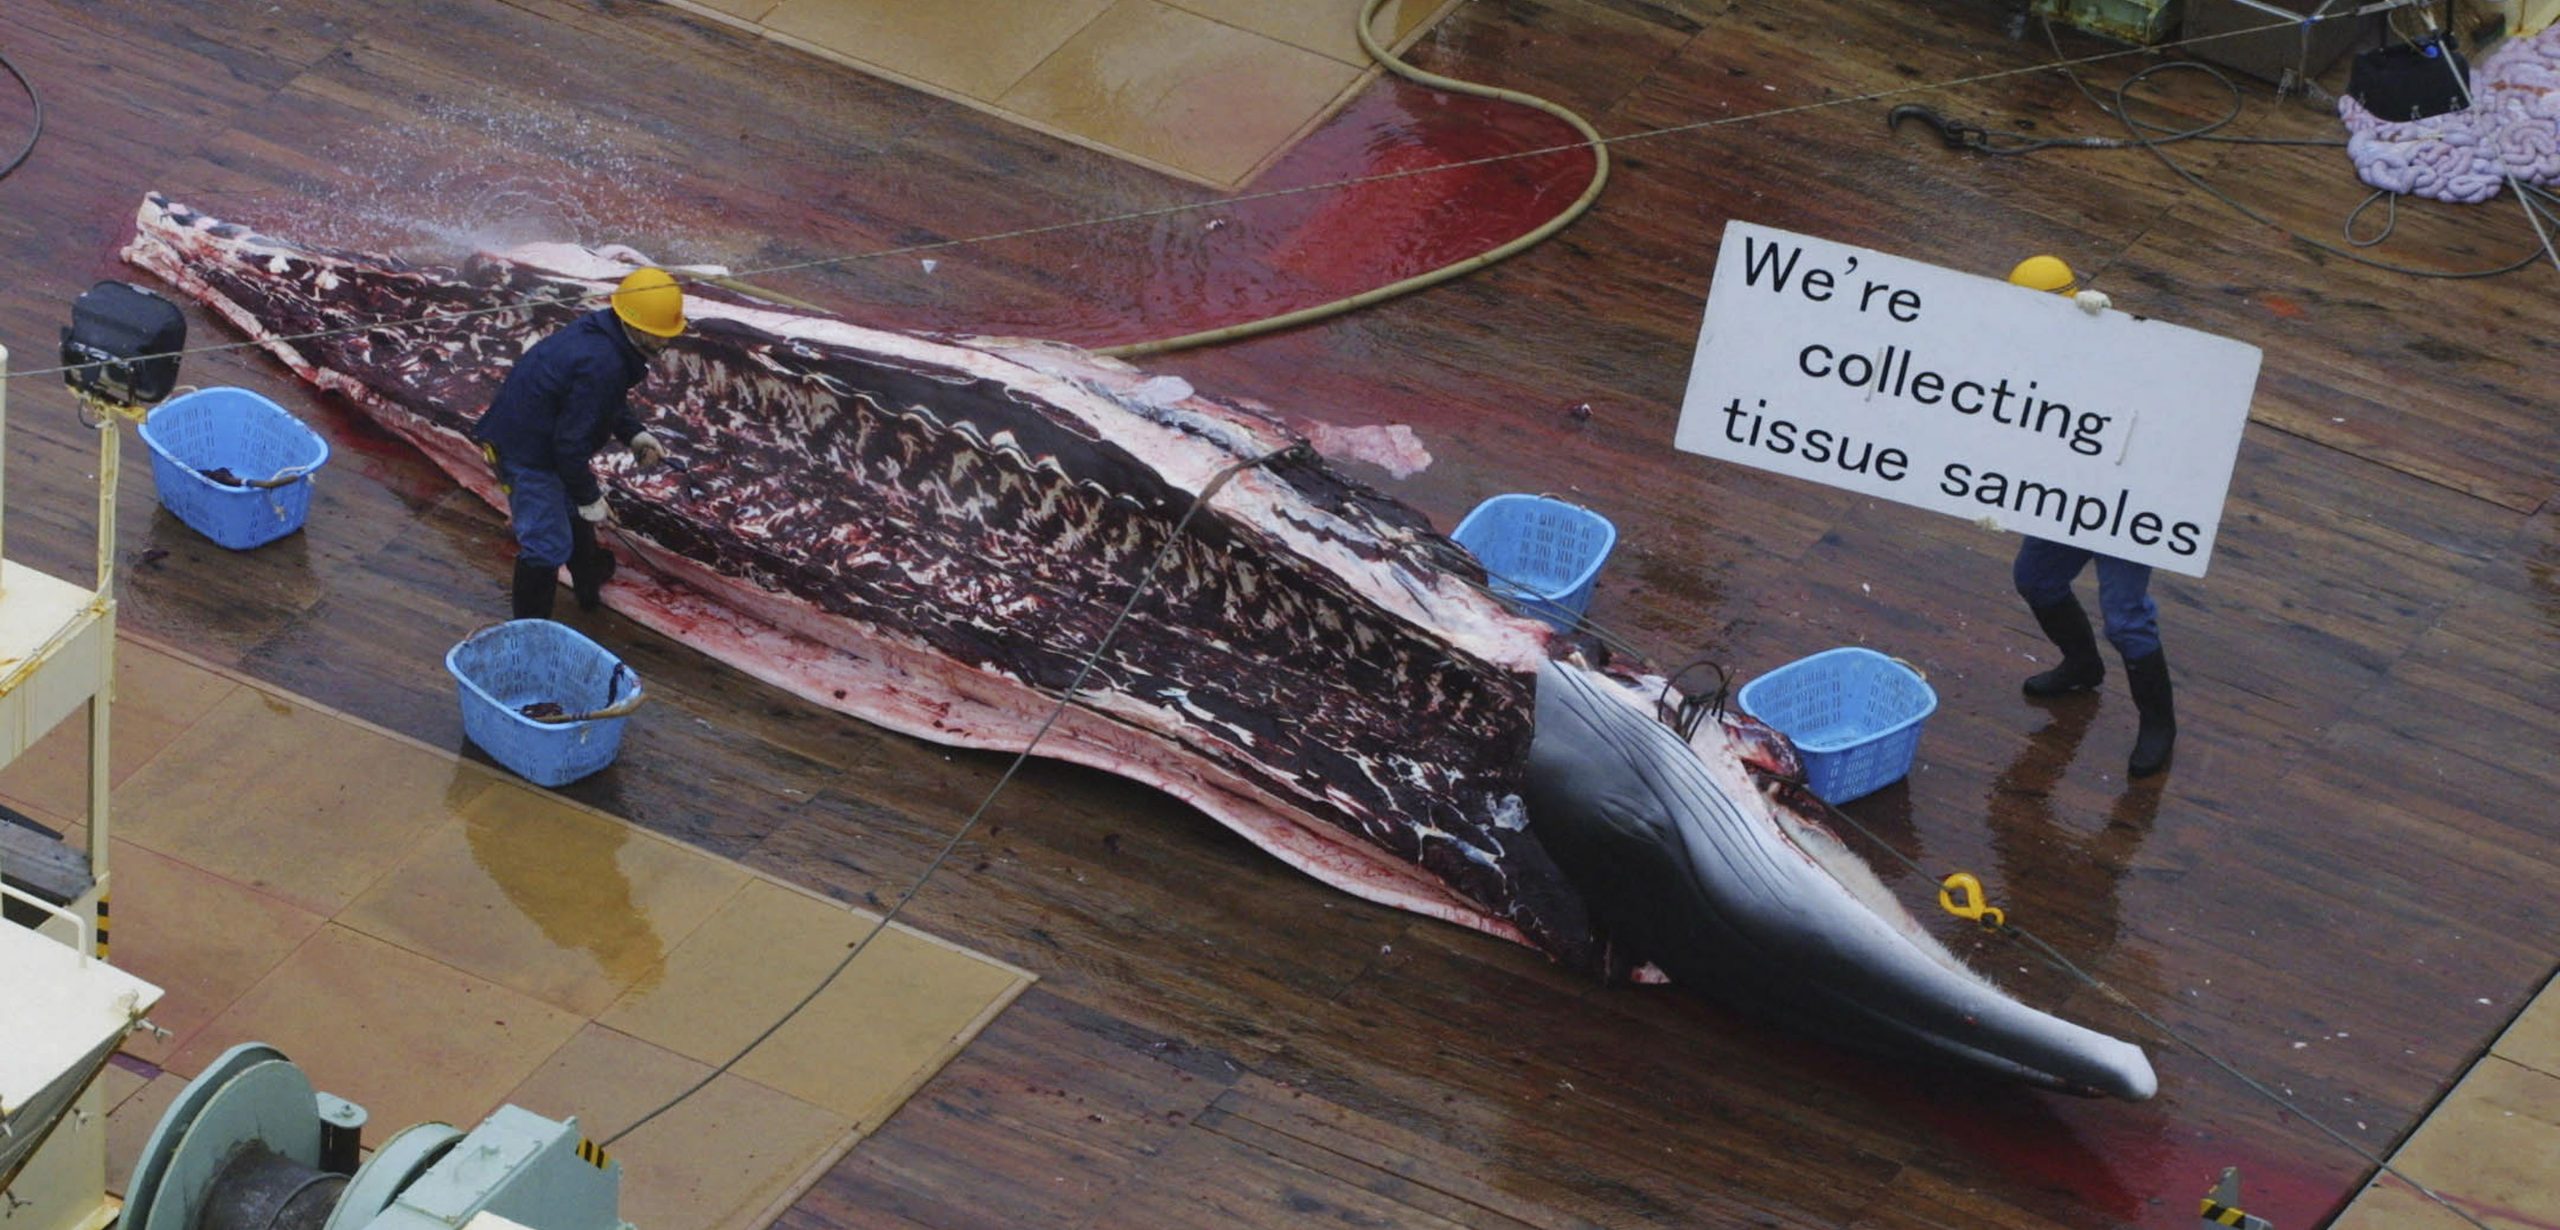 In 2001, a crew member aboard a Japanese scientific whaling vessel—midway through dissecting an Antarctic minke whale—holds a sign to onlookers. Photo by Jeremy Sutton-Hibbert/Alamy Stock Photo